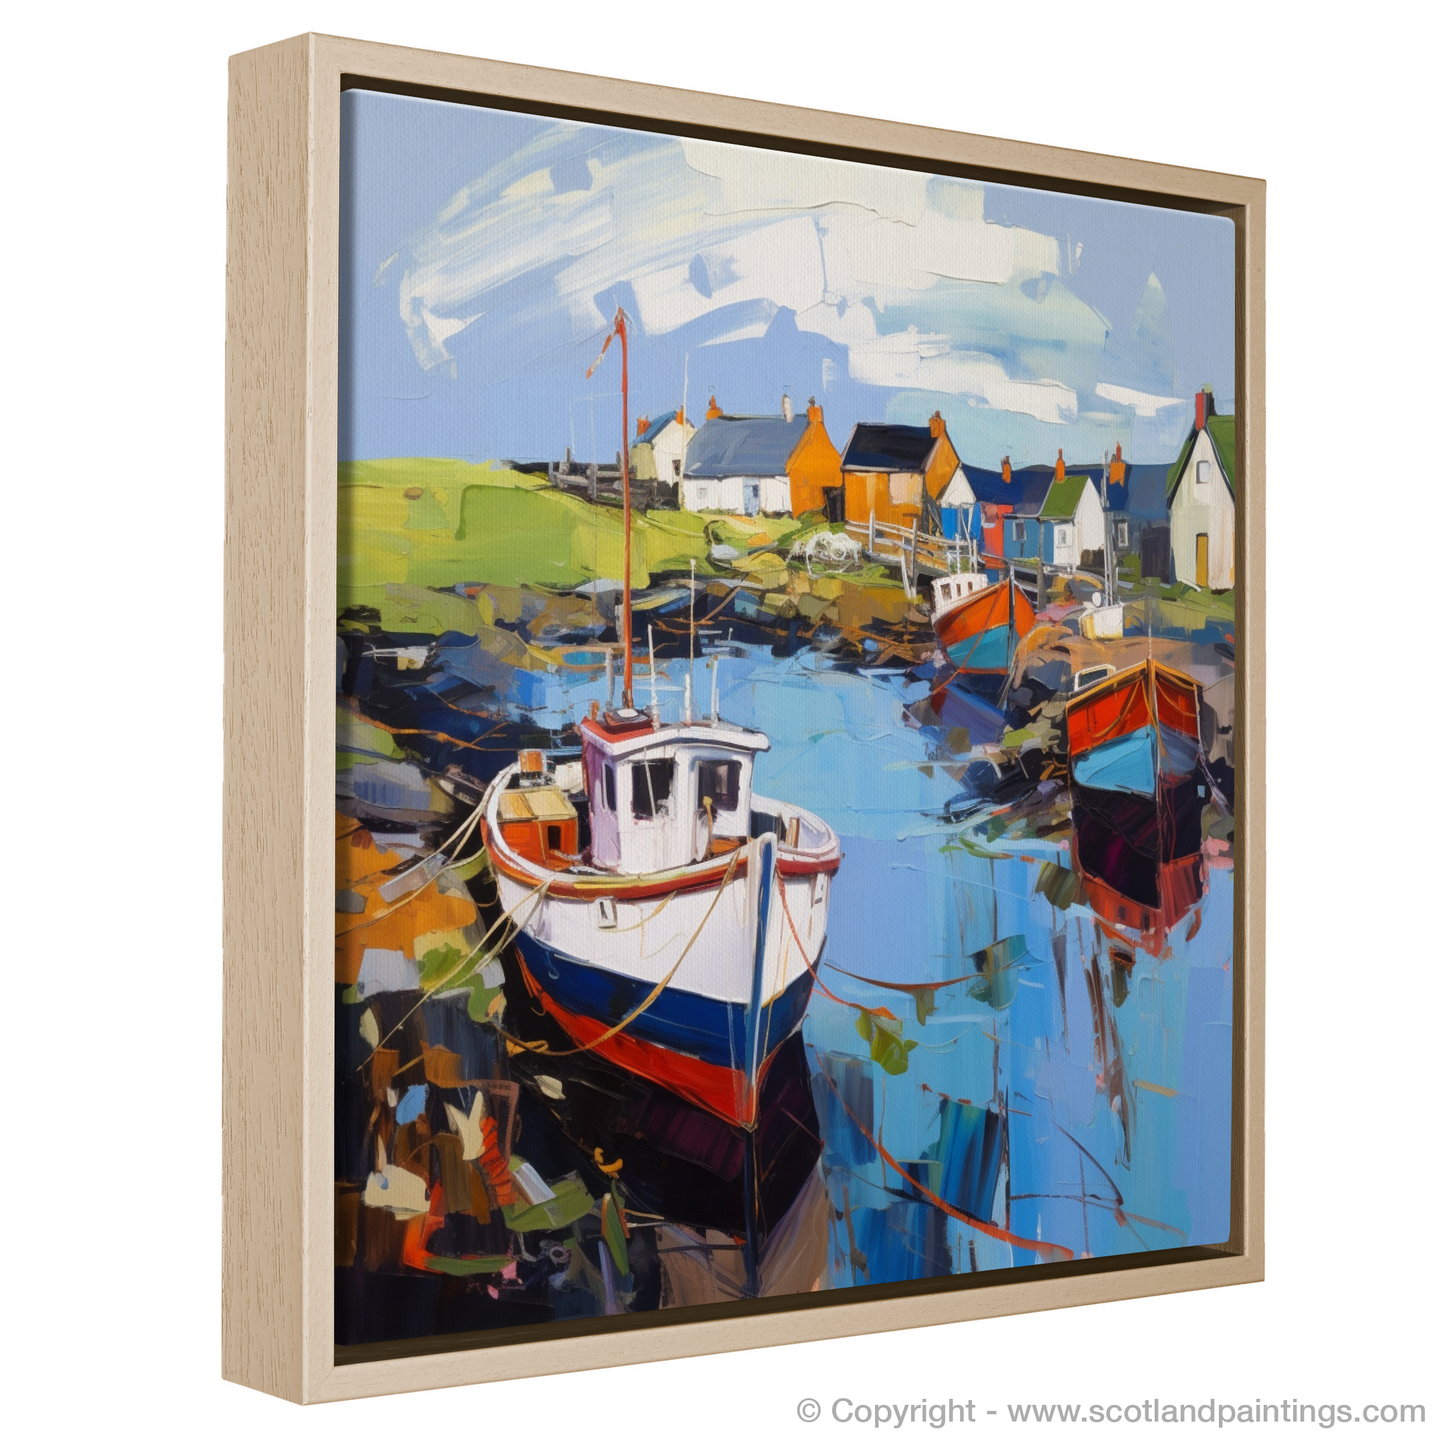 Painting and Art Print of Lybster Harbour, Caithness entitled "Lybster Harbour Vibrance: An Expressionist Ode to Caithness Coast".